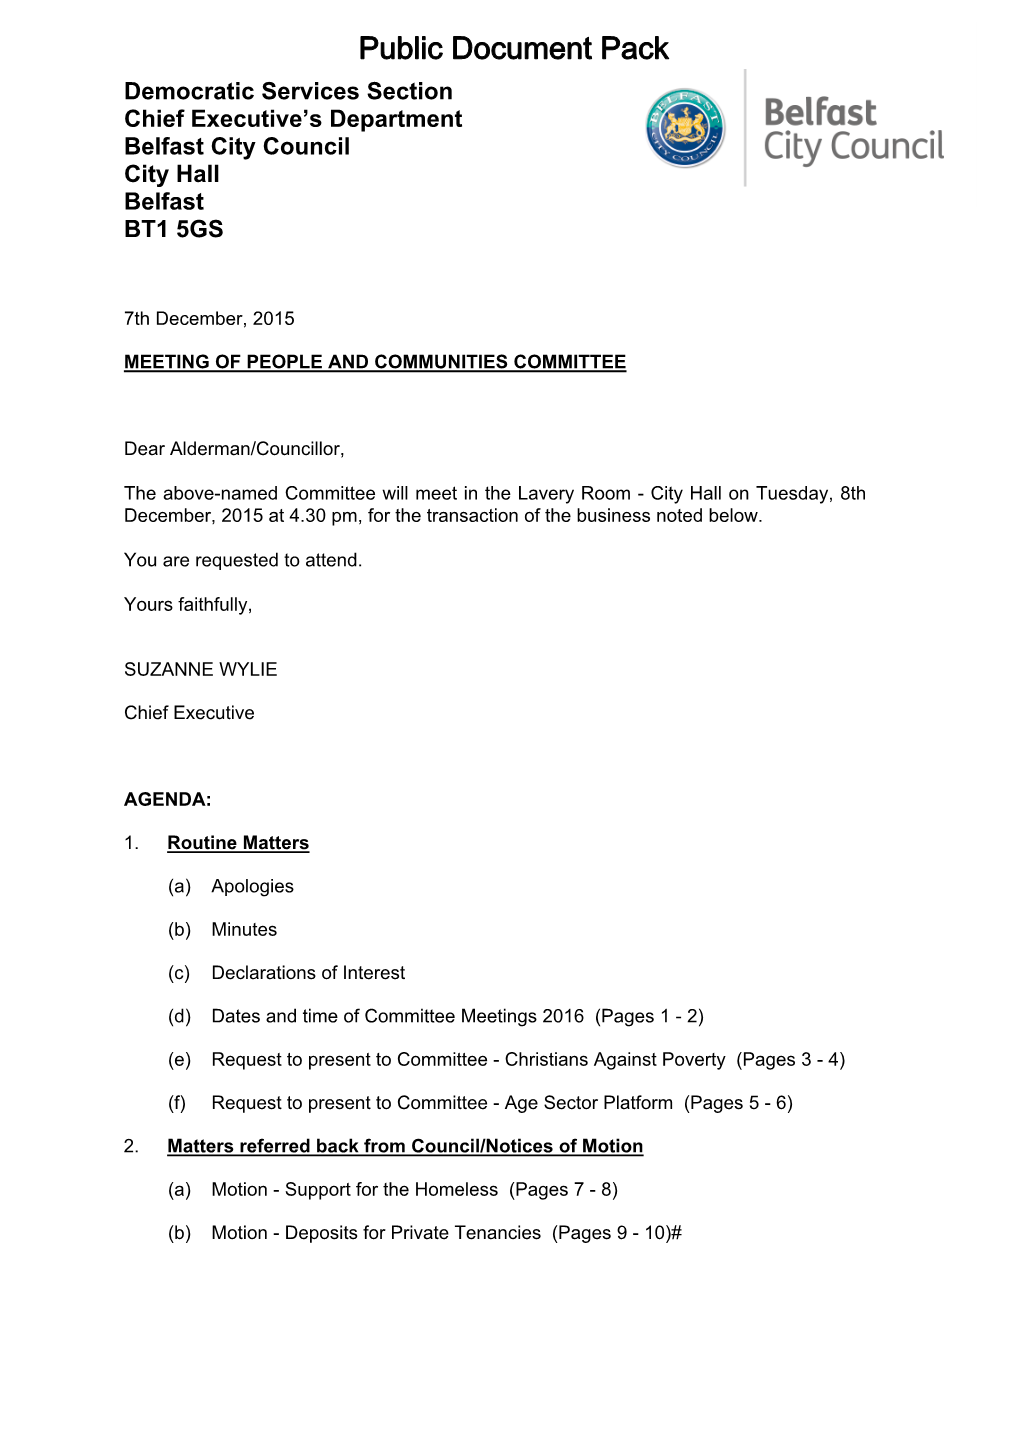 (Public Pack)Combined Pack Agenda Supplement for People and Communities Committee, 08/12/2015 16:30